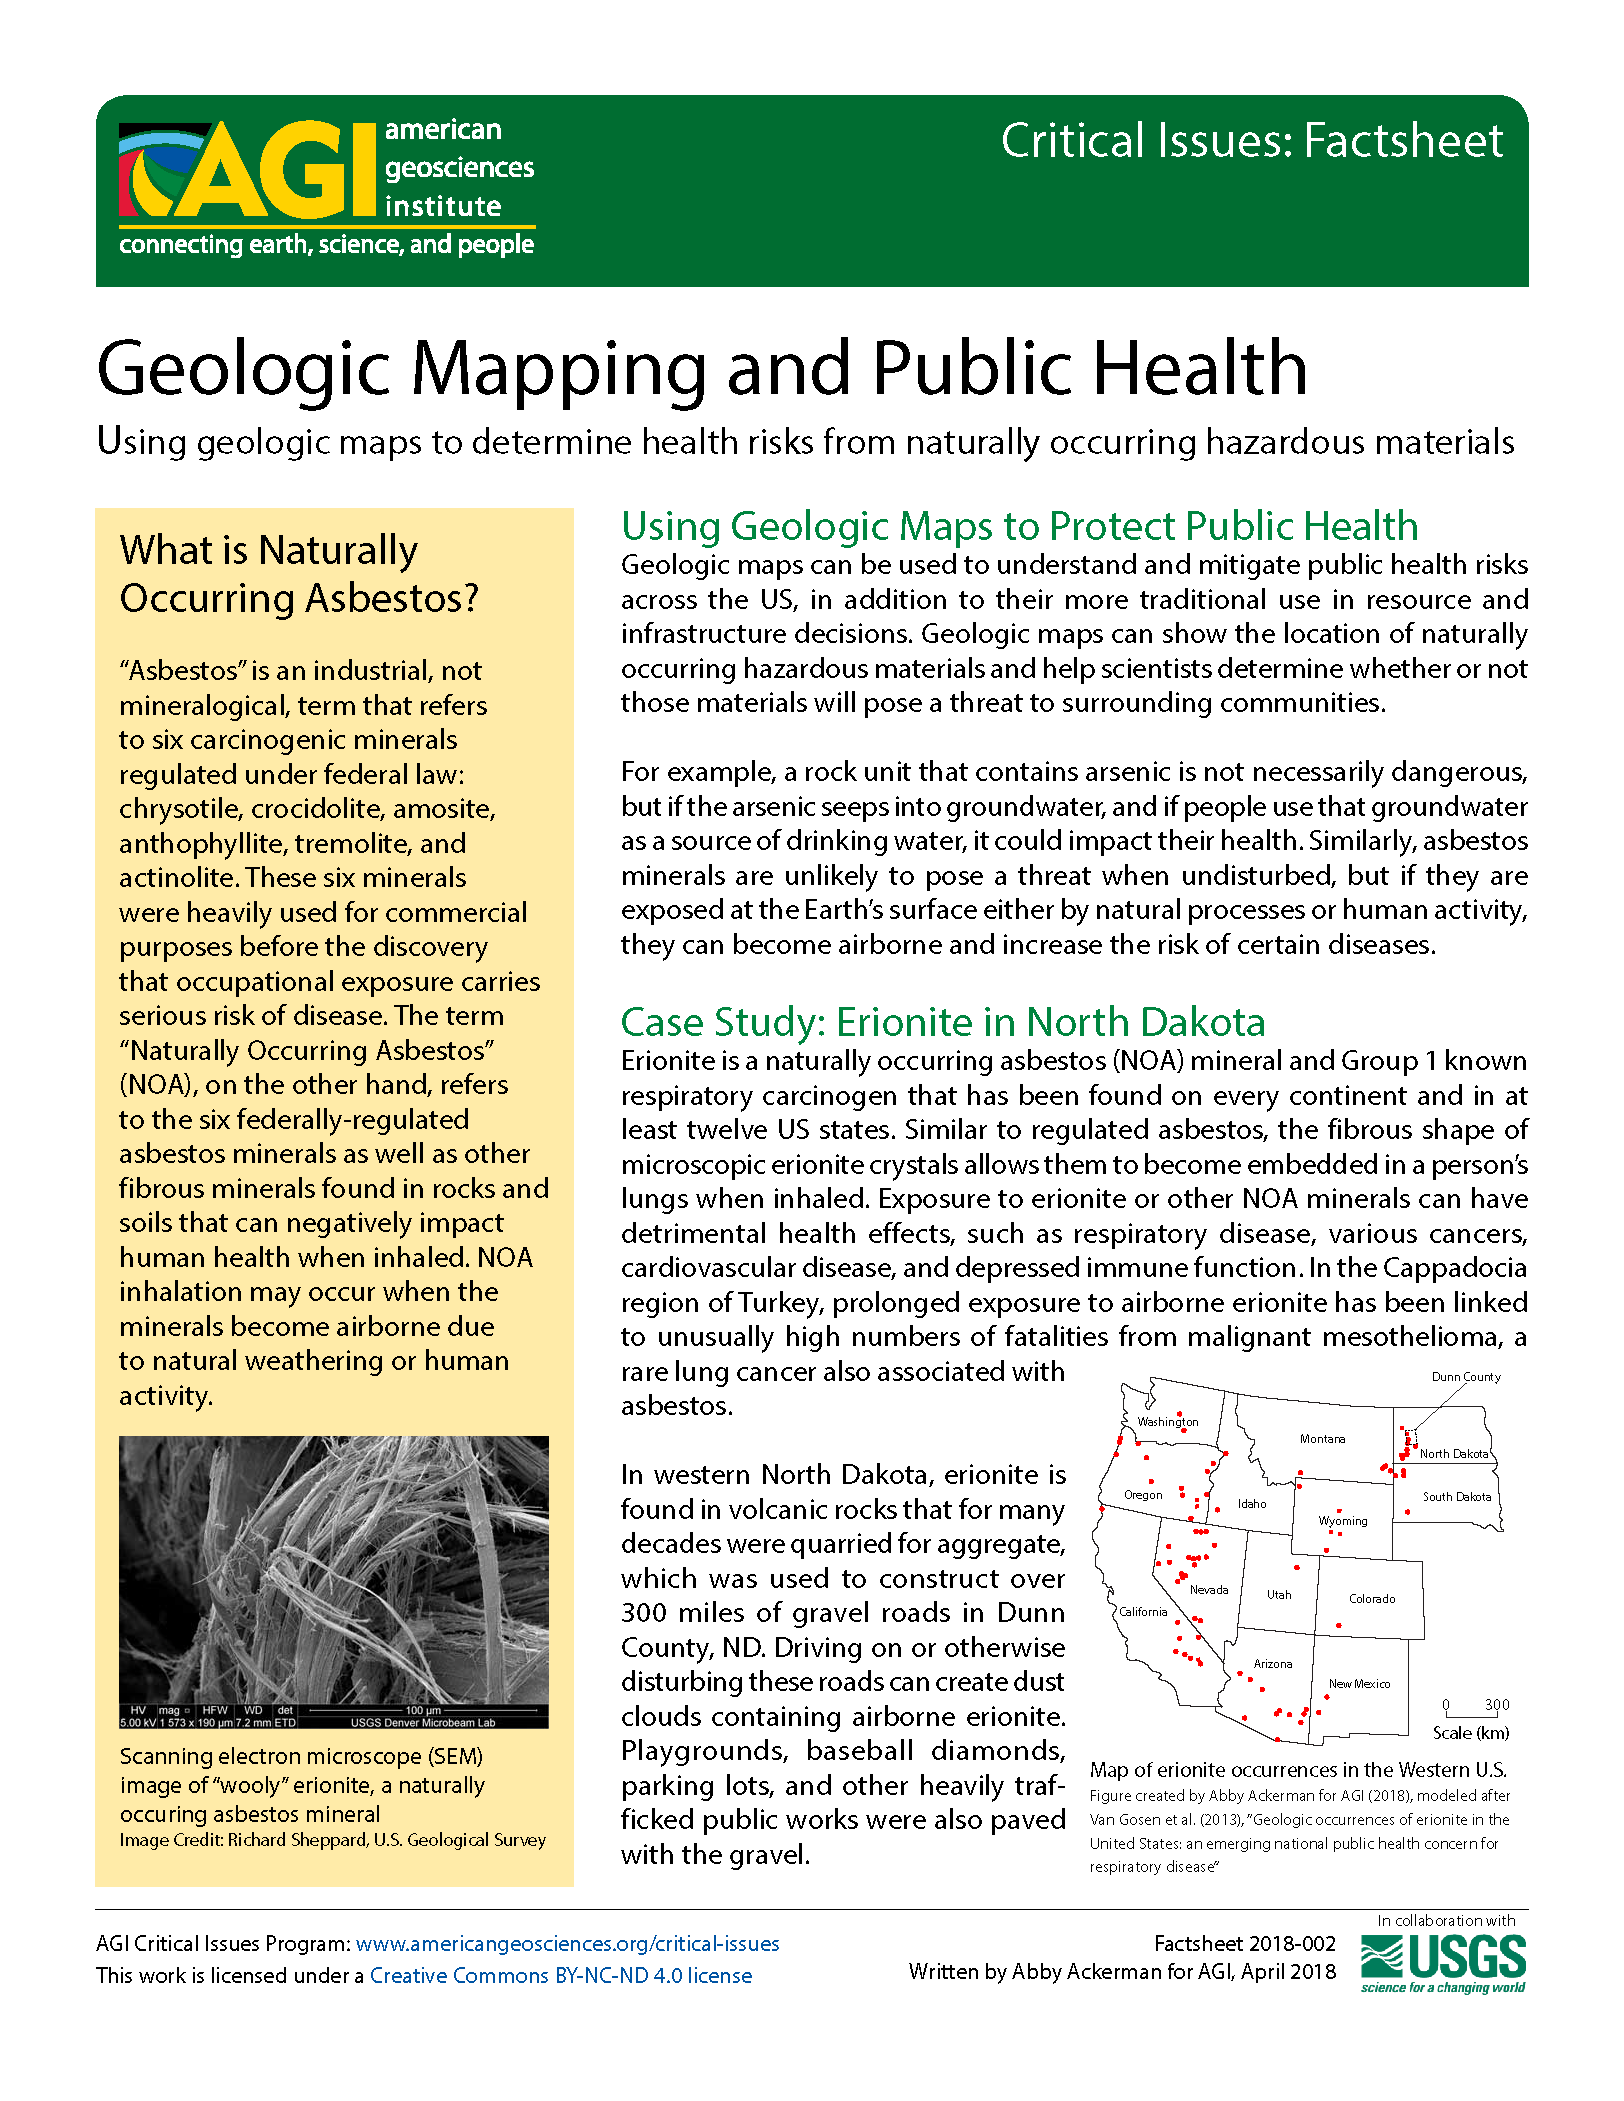 Cover of AGI Factsheet 2018-002-Geologic Mapping and Public Health